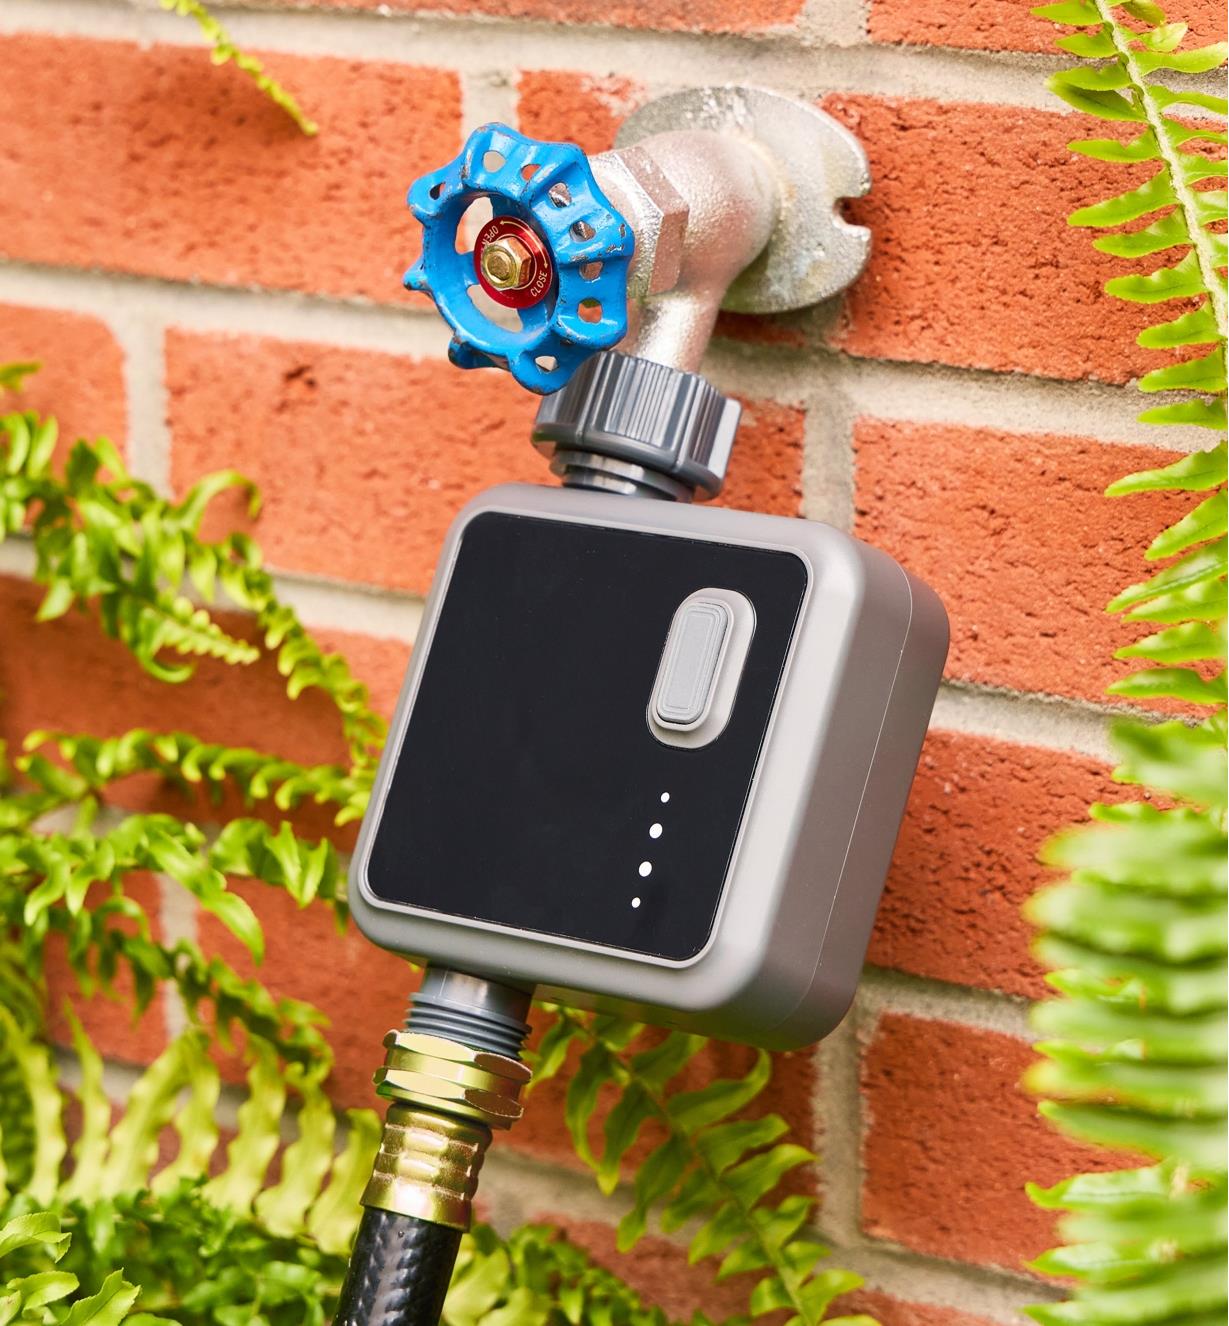 The Wi-Fi one-zone water timer connected to an outdoor tap